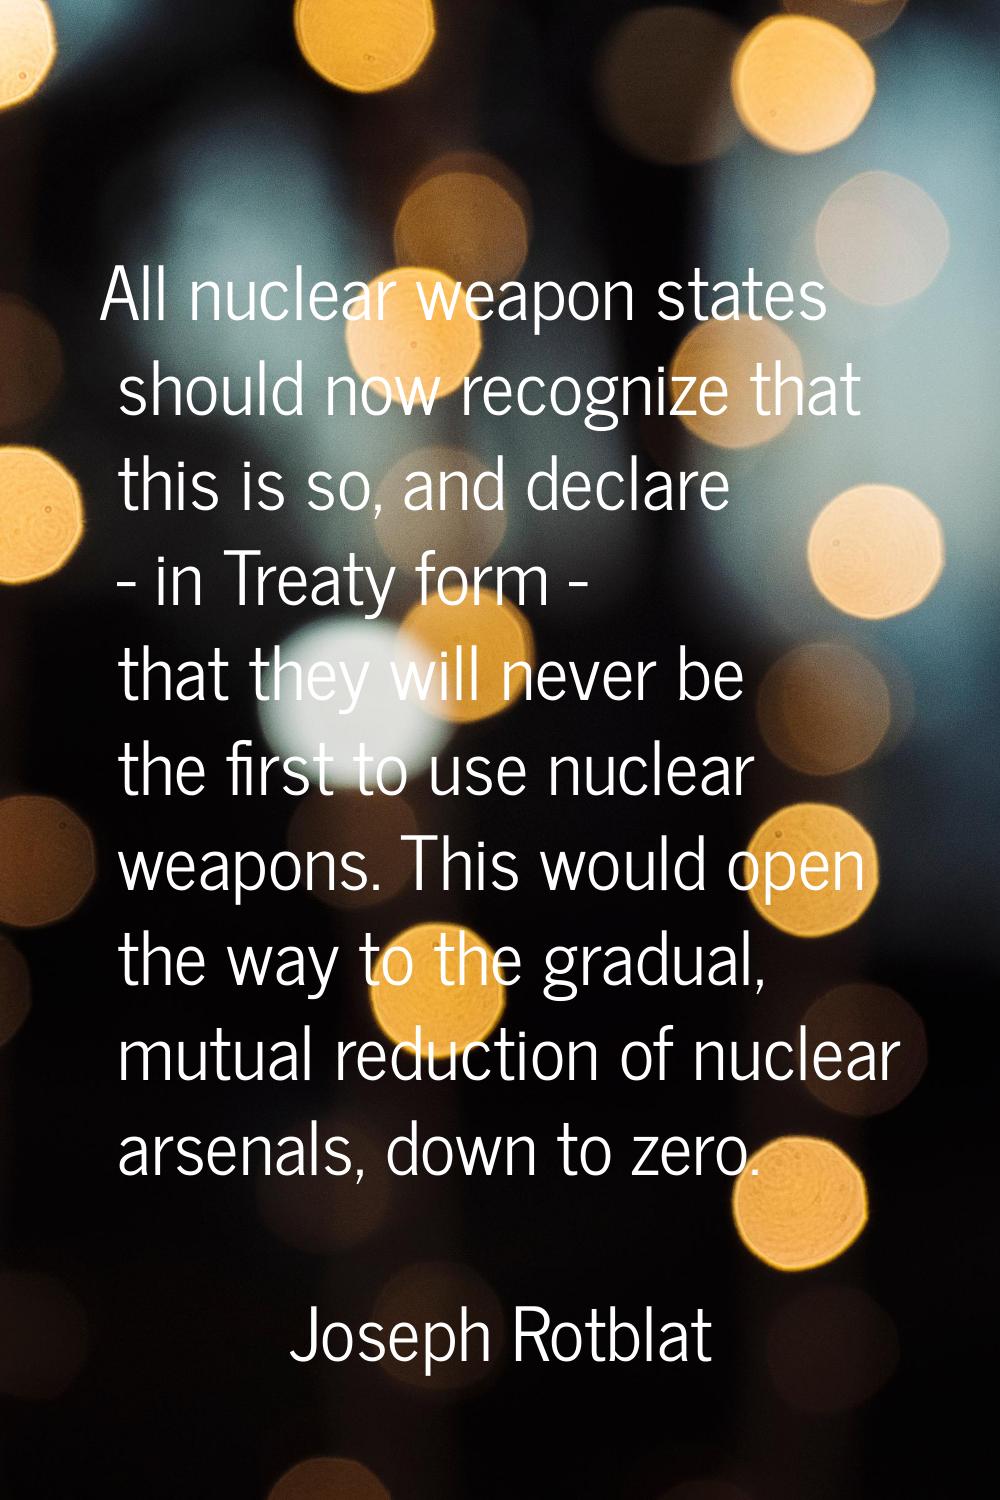 All nuclear weapon states should now recognize that this is so, and declare - in Treaty form - that